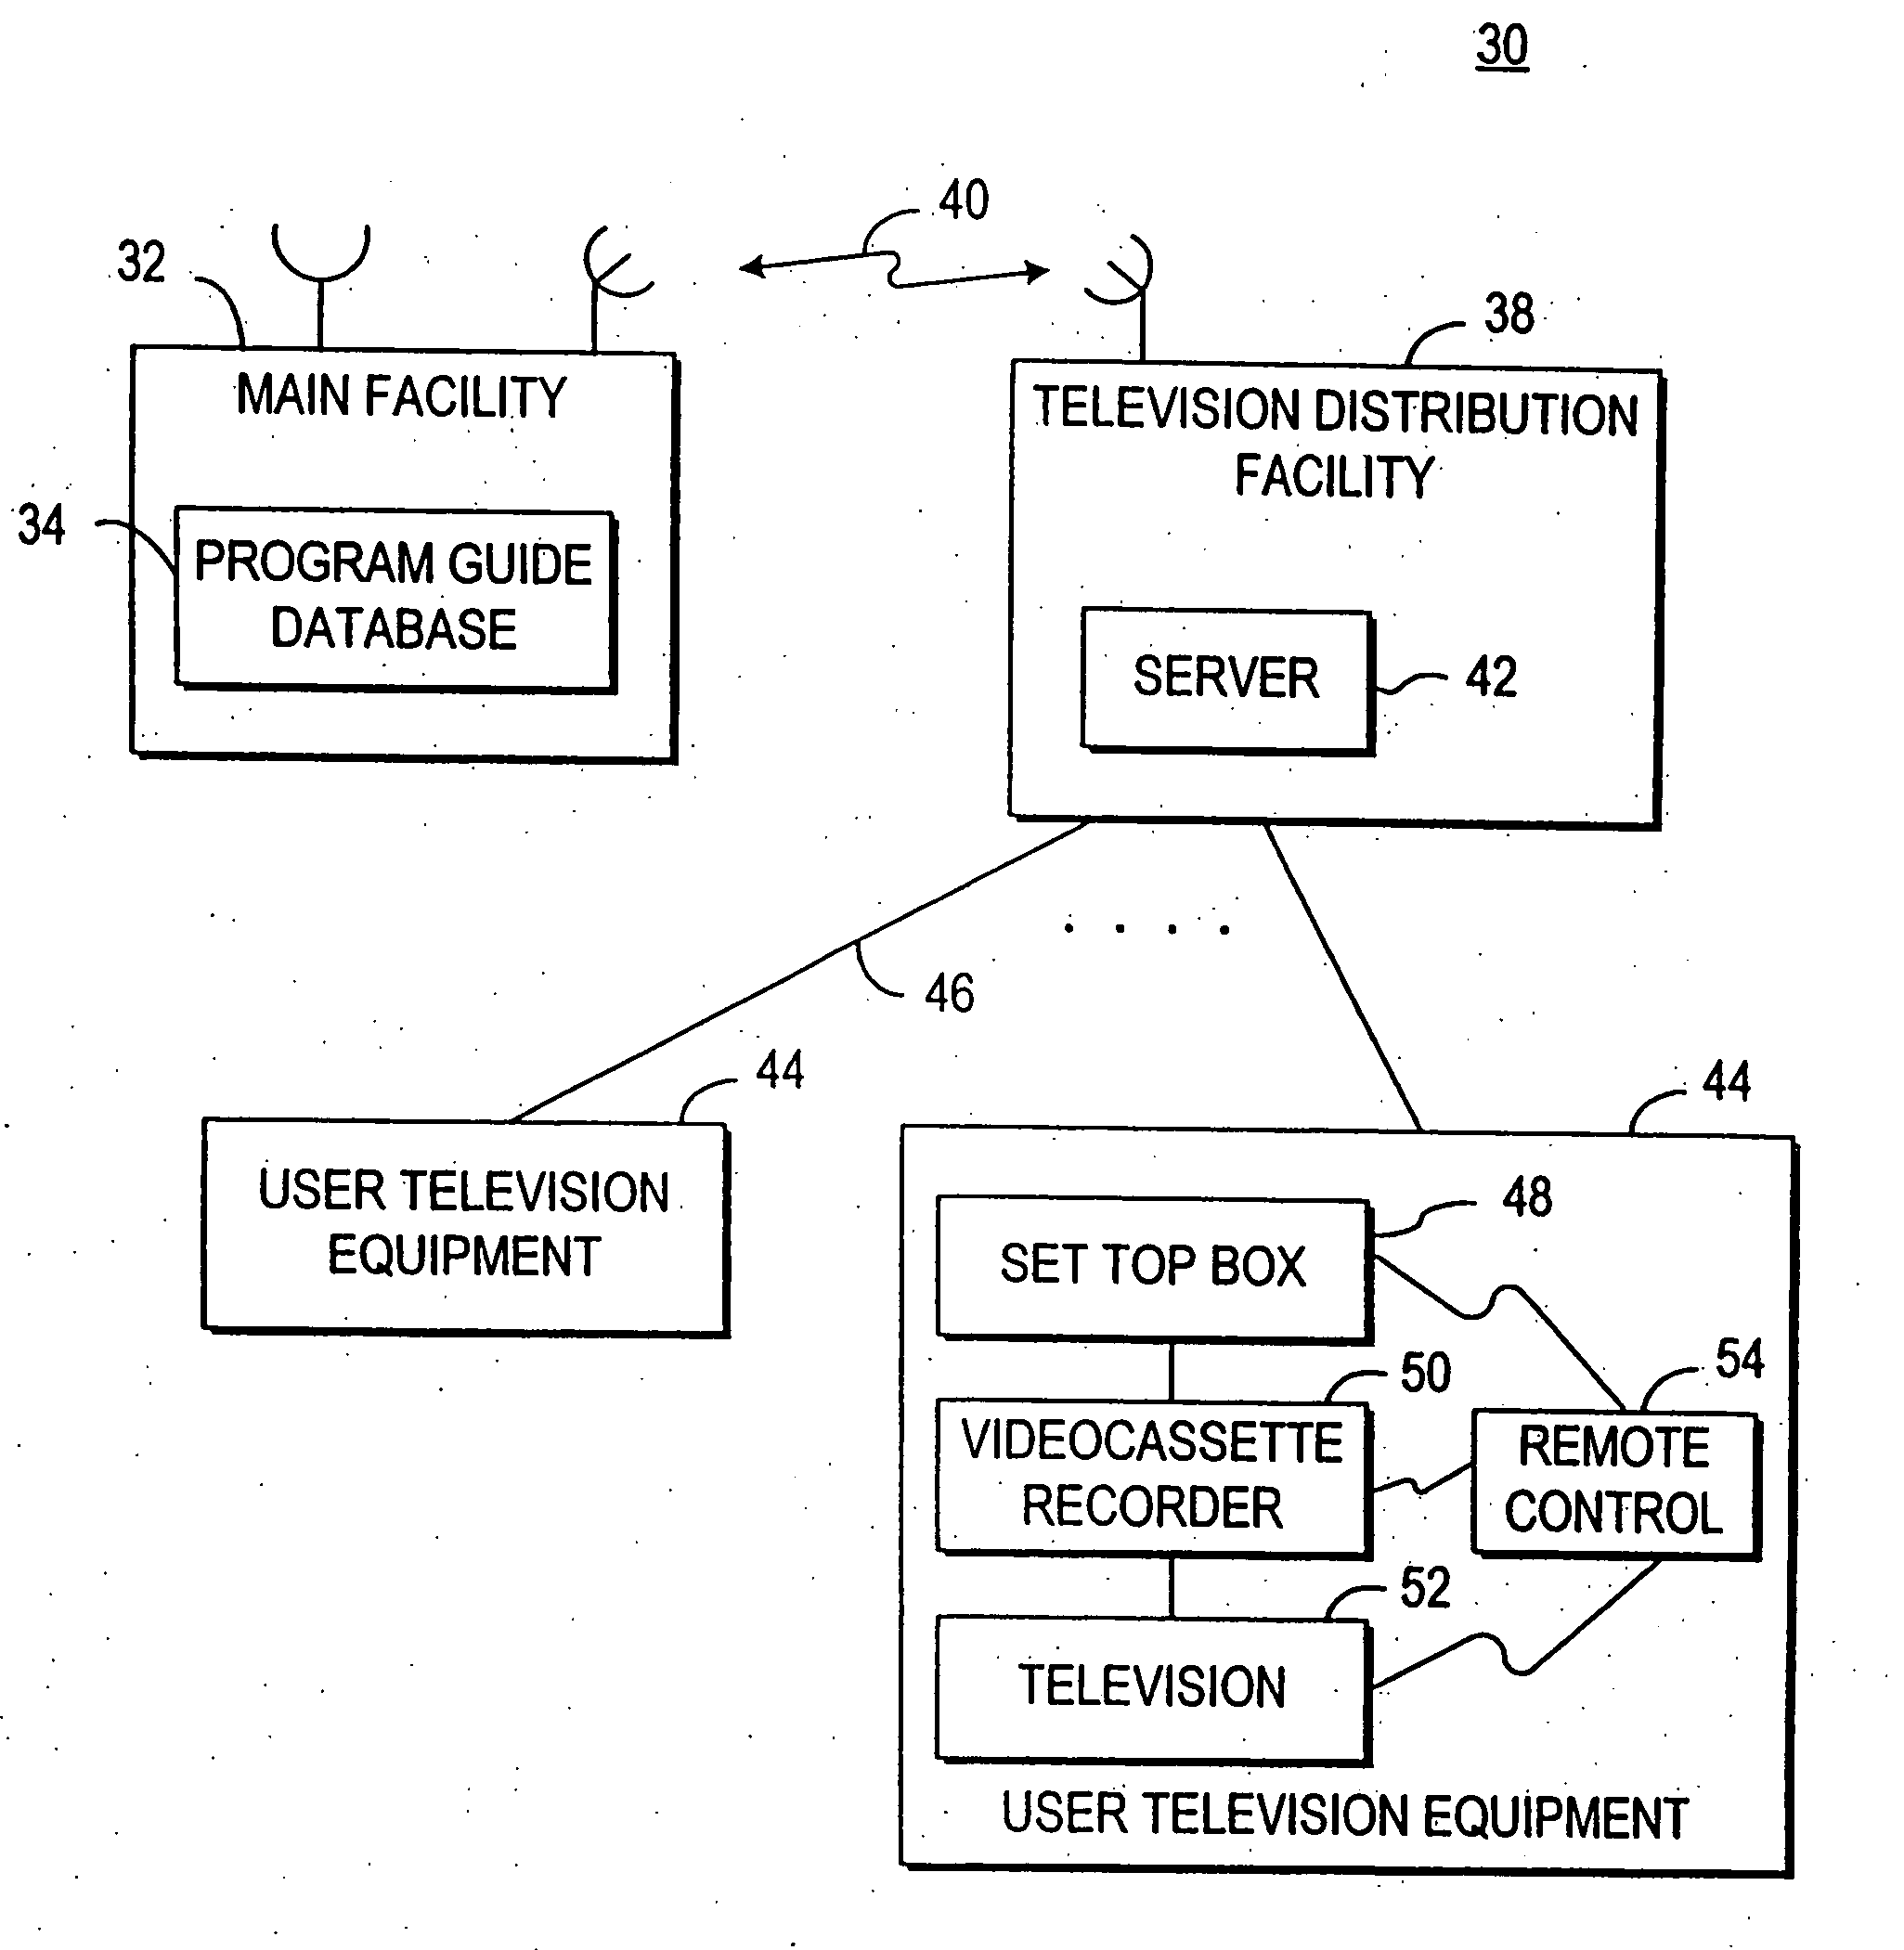 Interactive television program guide system having multiple devices within a household